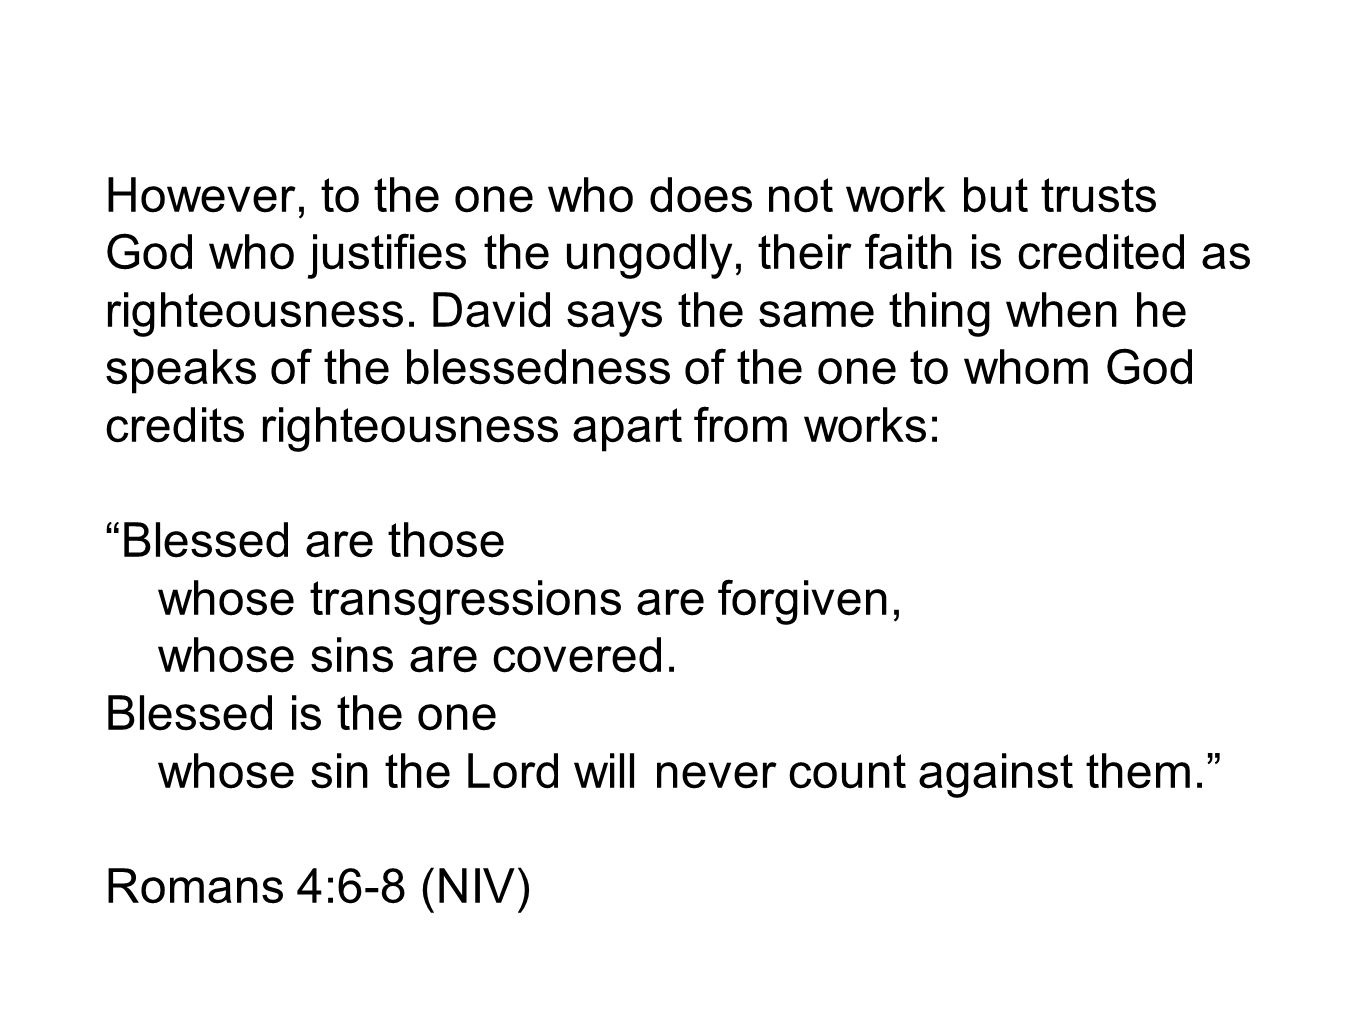 However, to the one who does not work but trusts God who justifies the ungodly, their faith is credited as righteousness. David says the same thing when he speaks of the blessedness of the one to whom God credits righteousness apart from works: